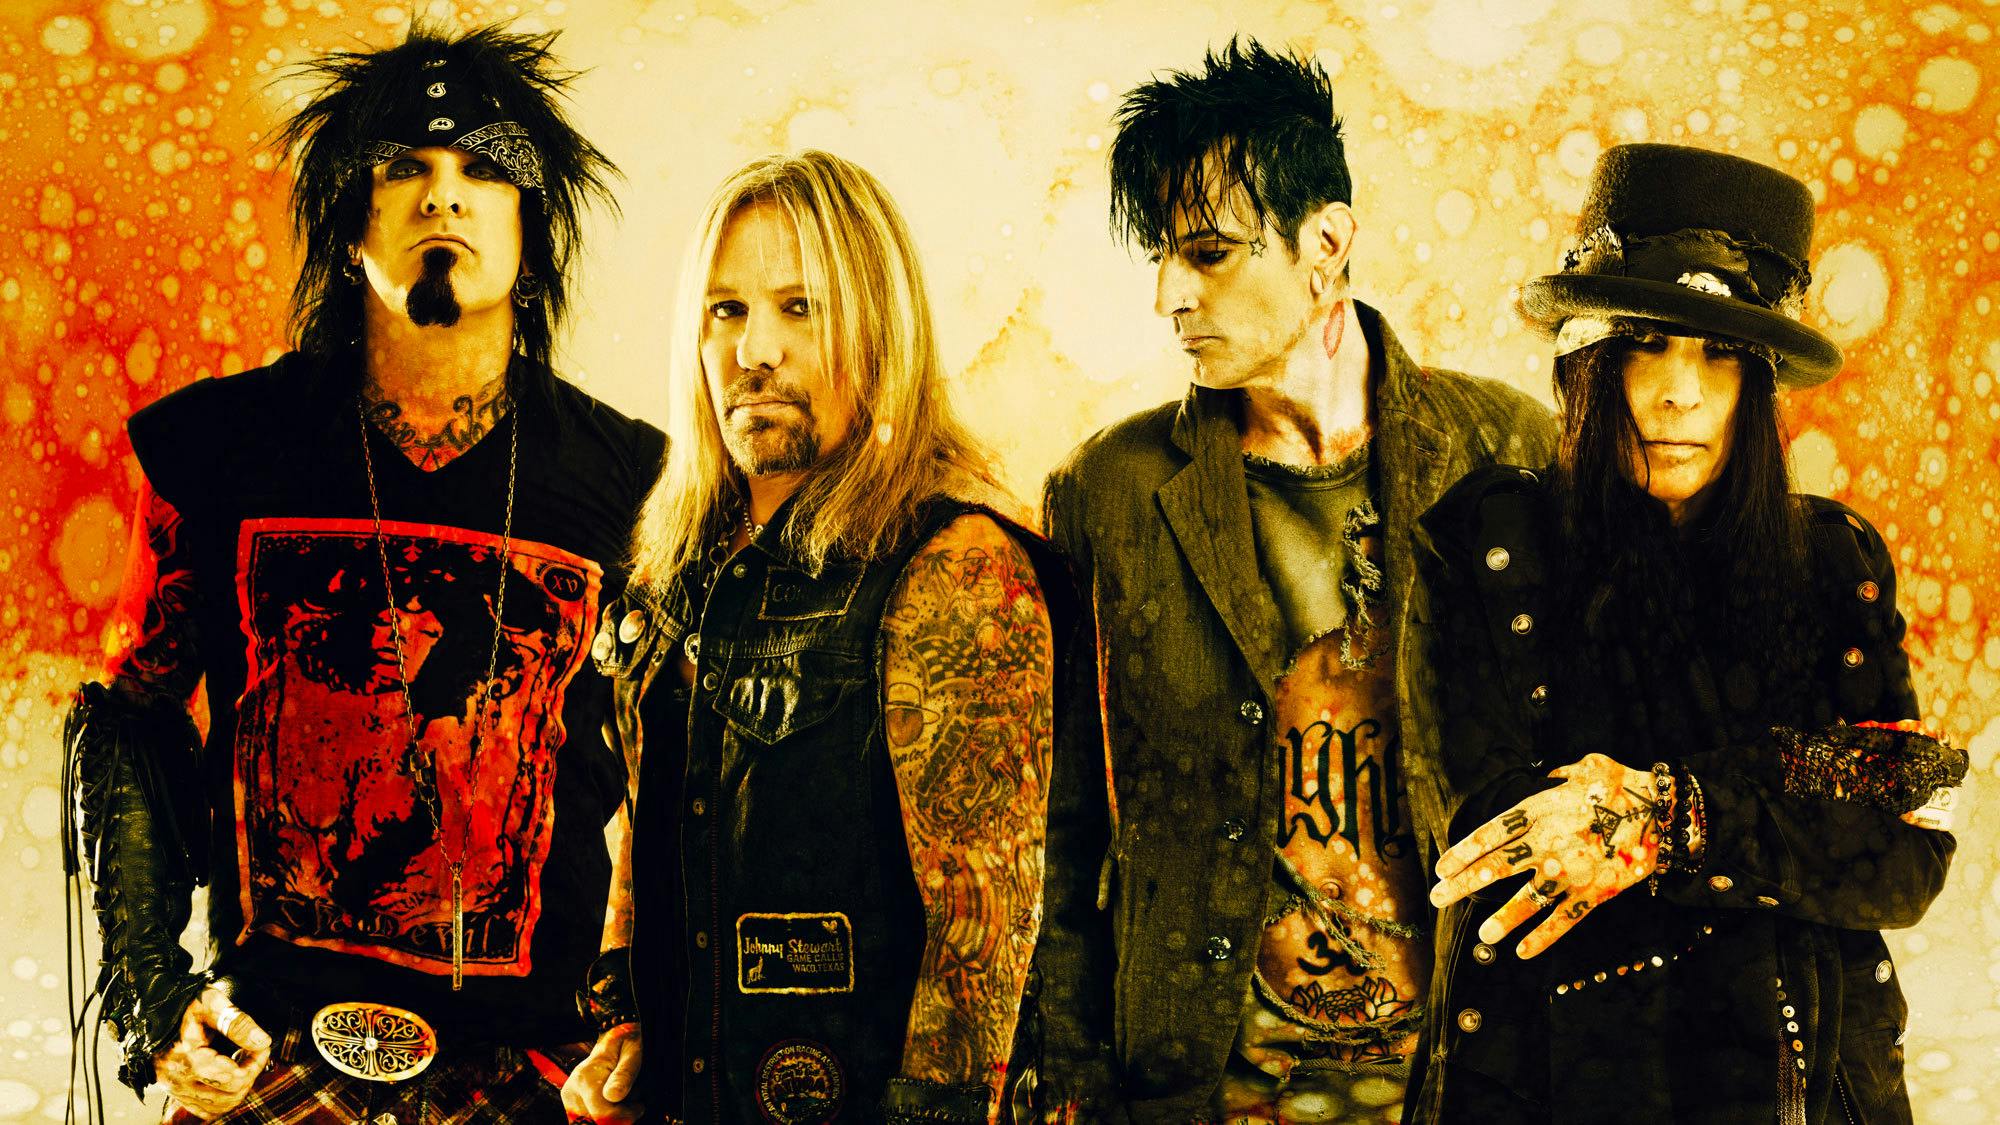 Mötley Crüe Land A Billboard Top Ten Spot For The First Time In Over A Decade